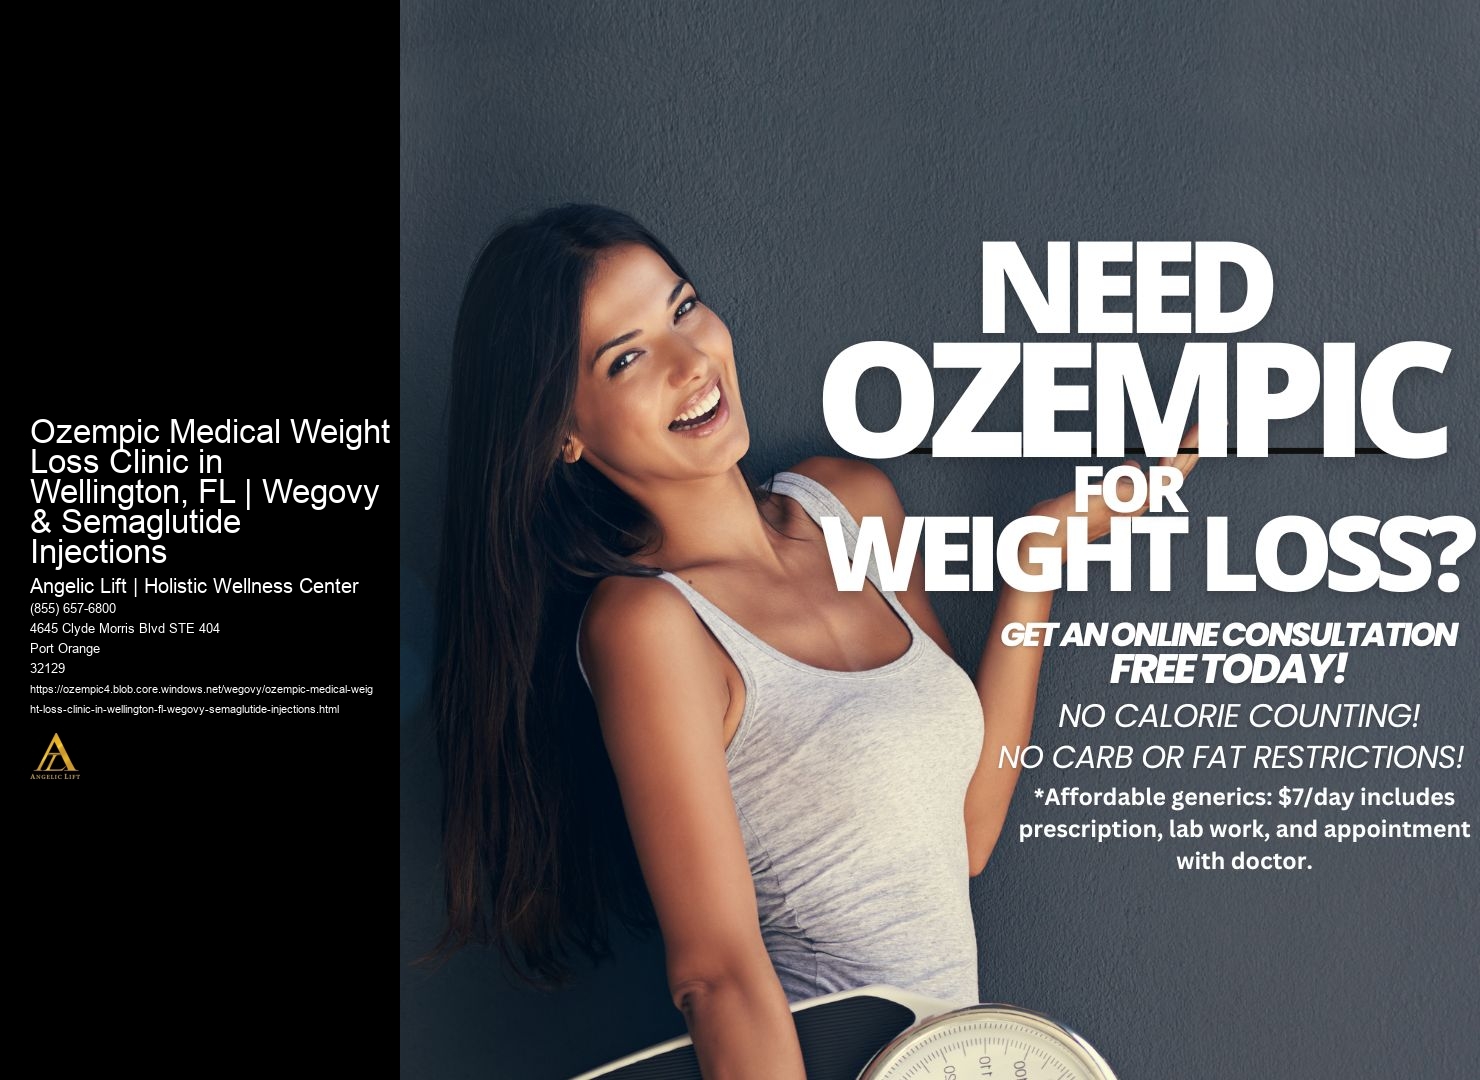 Ozempic Medical Weight Loss Clinic in Wellington, FL | Wegovy & Semaglutide Injections